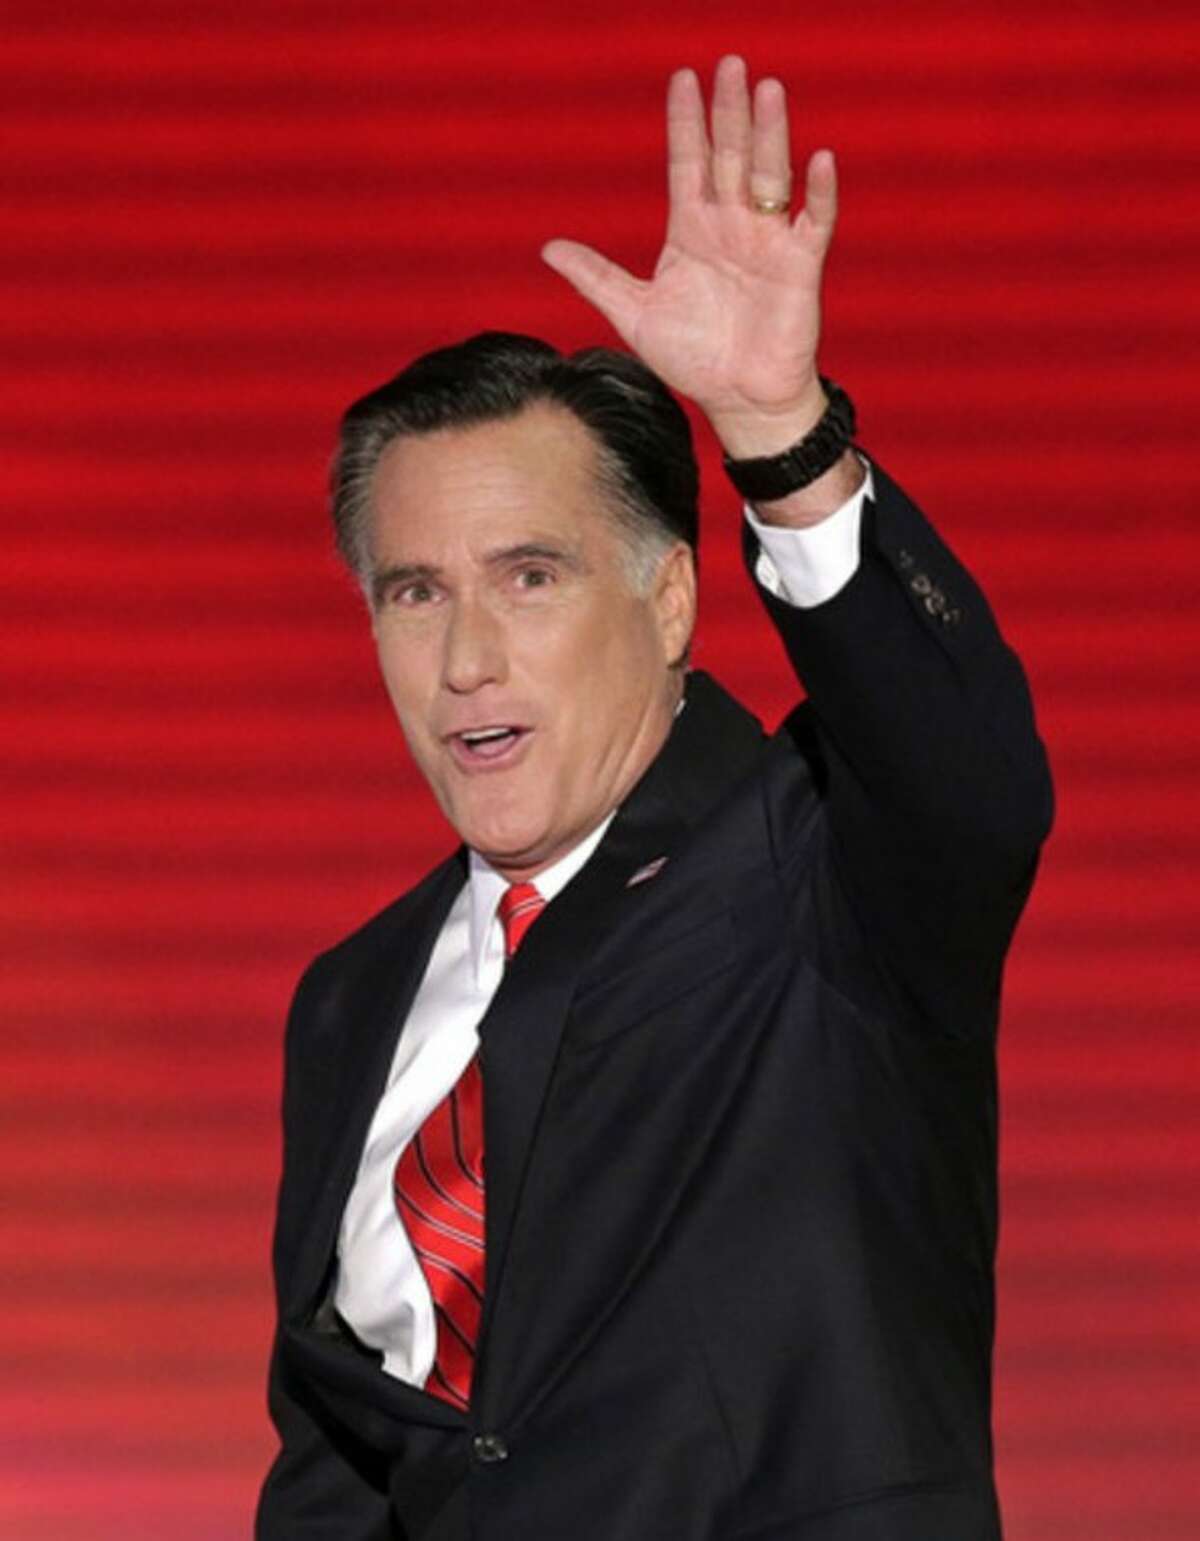 Republican presidential nominee Mitt Romney waves to the delegates as he walks to the stage during the Republican National Convention in Tampa, Fla., on Thursday, Aug. 30, 2012. (AP Photo/J. Scott Applewhite)